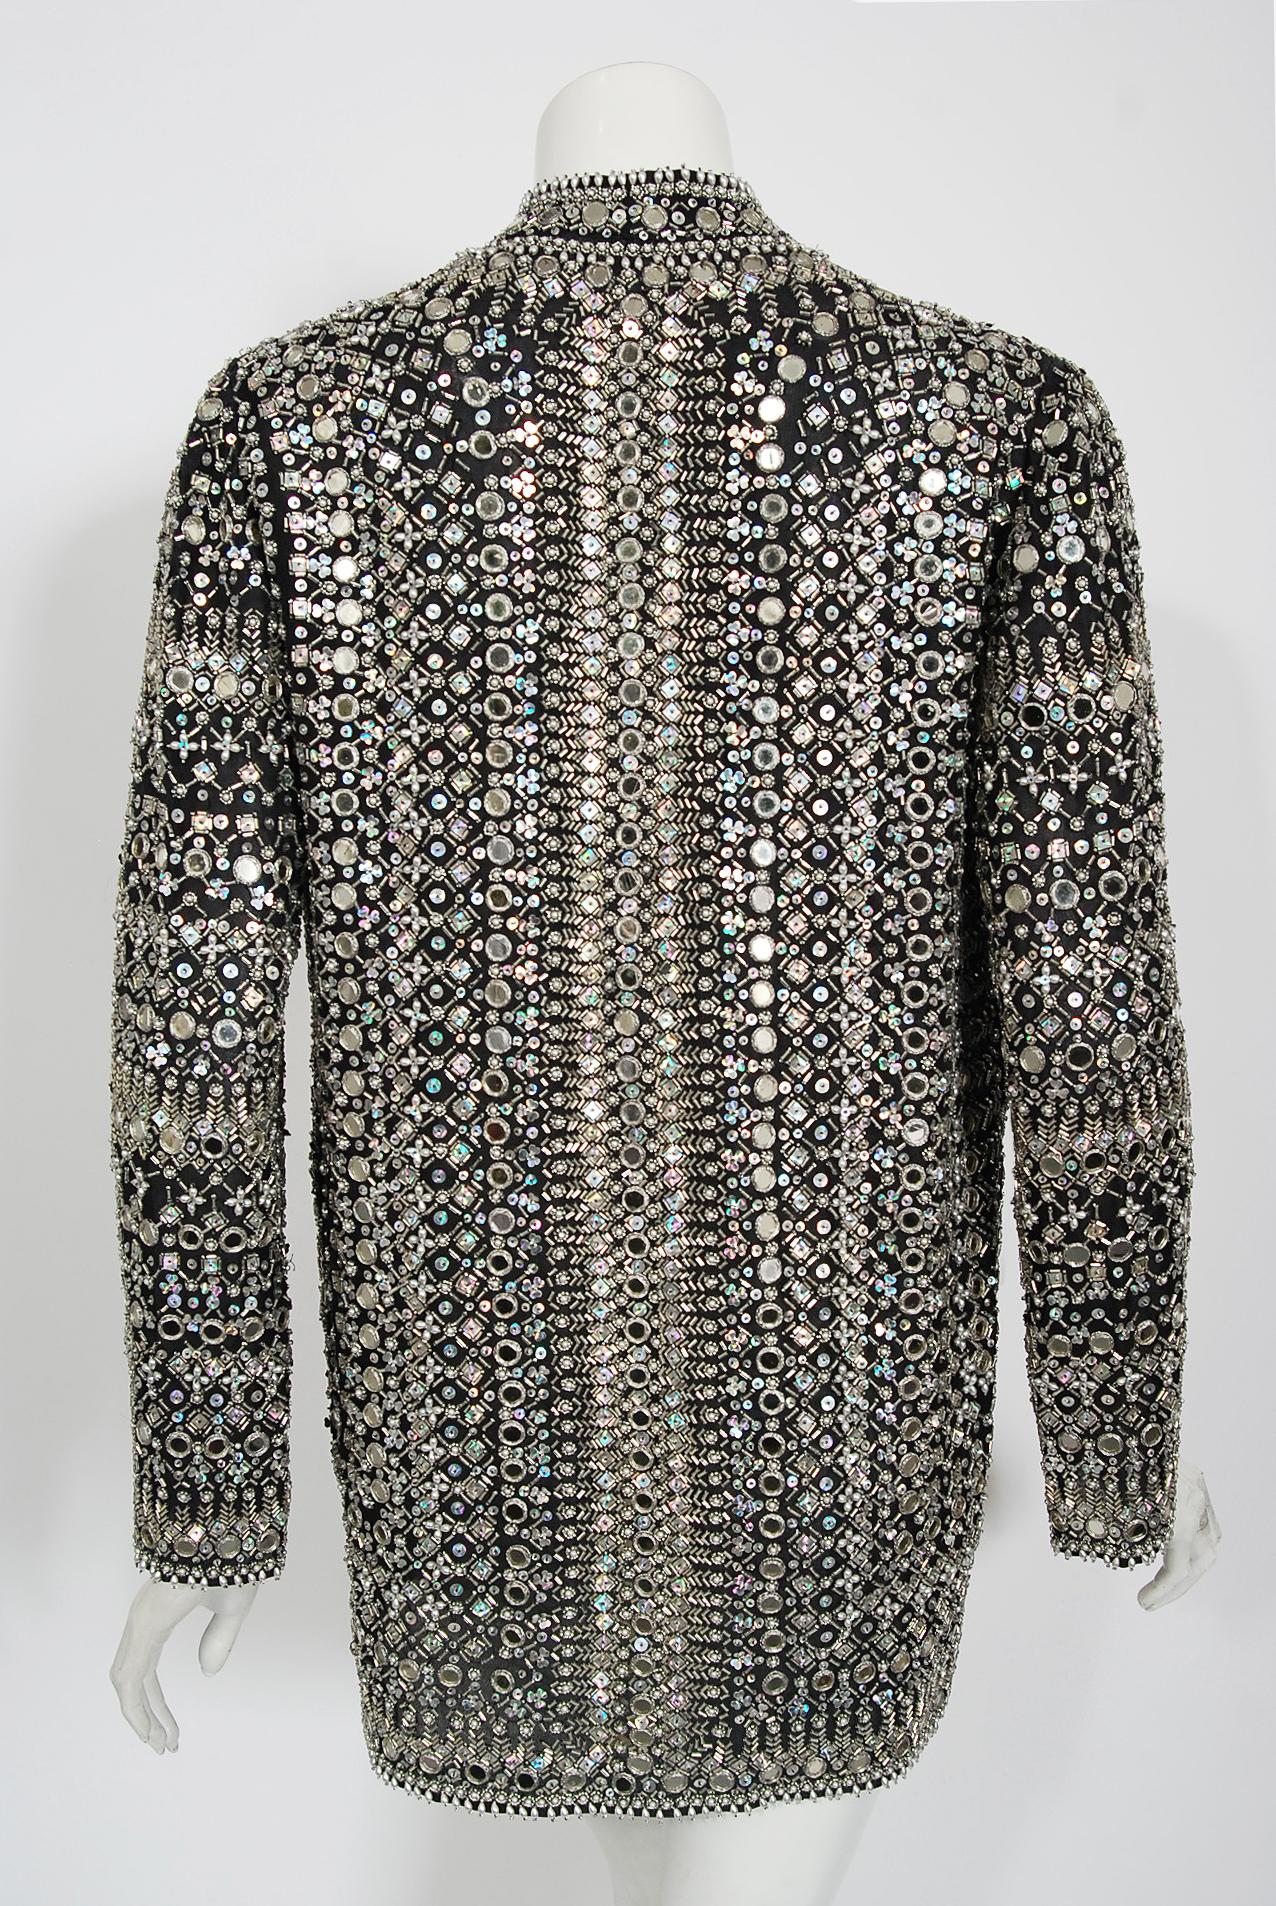 Vintage Halston Couture Beaded Mirror Mini Dress & Jacket Made For Liza Minnelli 5